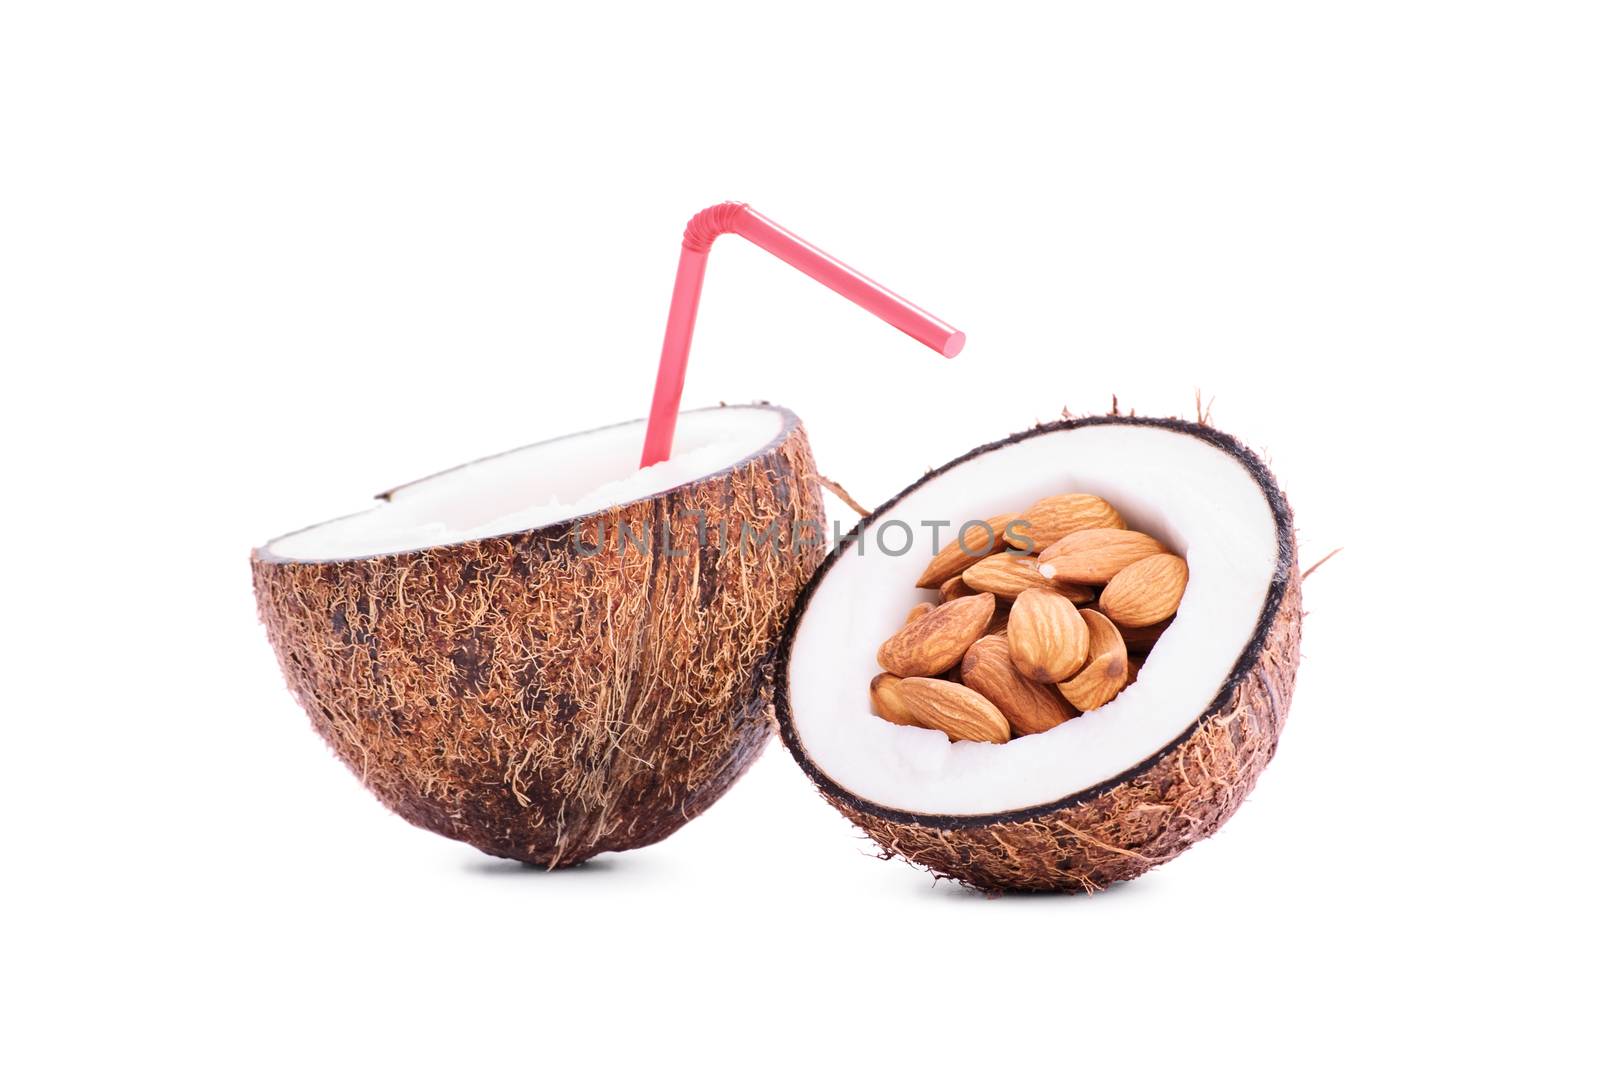 Sliced coconut fruit filled with almonds and coconut milk with a straw, isolated on white background.